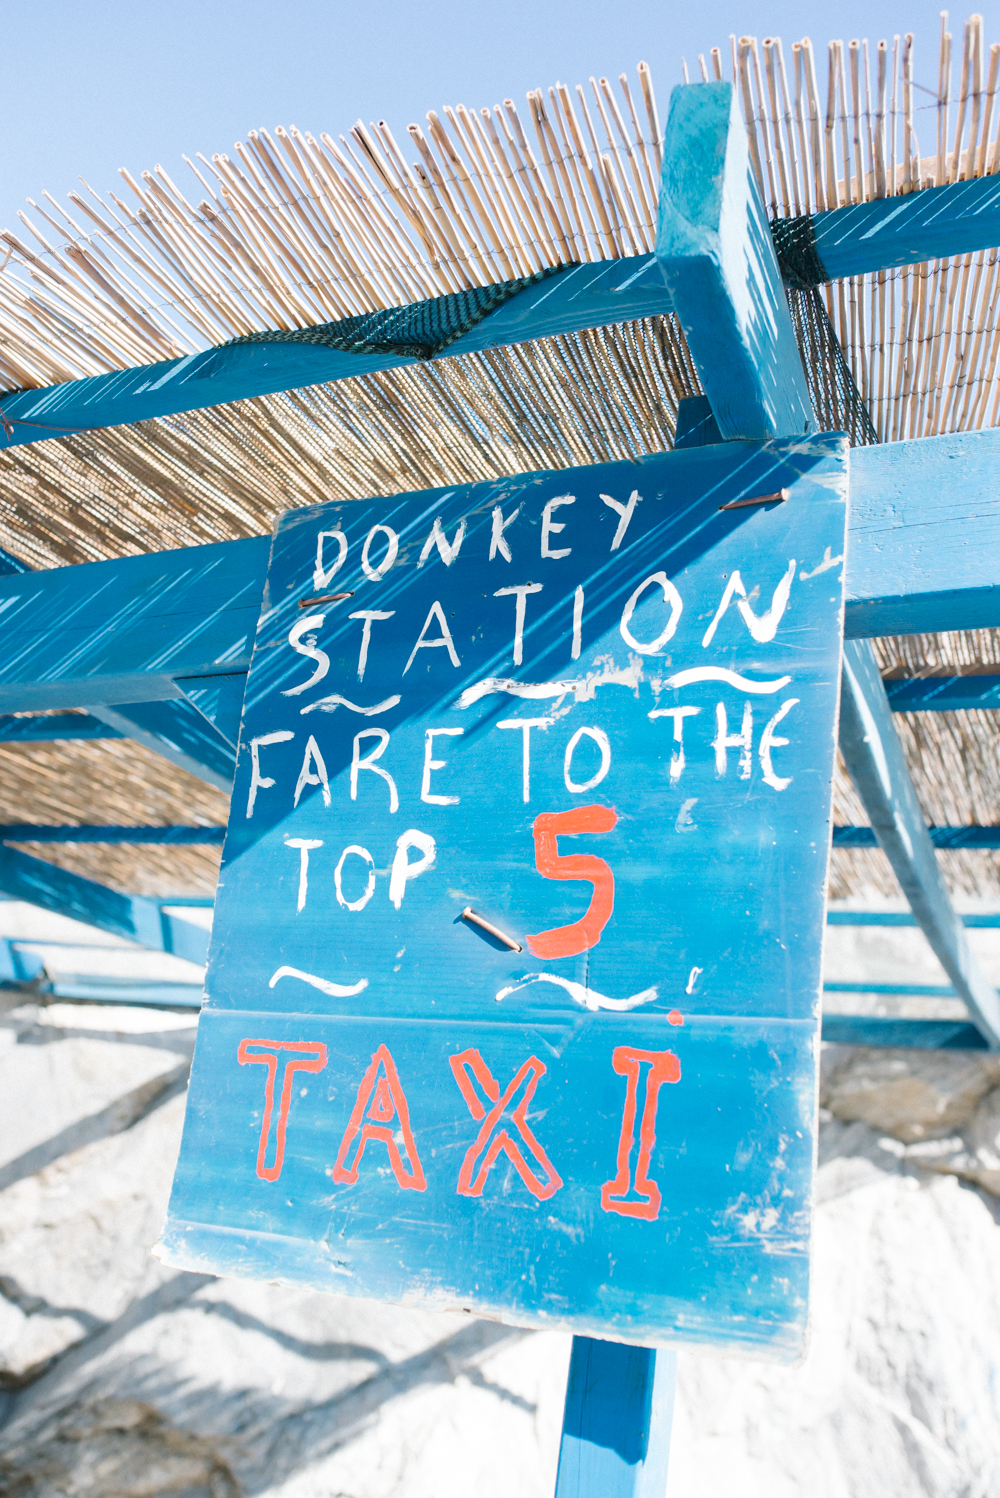 Donkey and Taxi Station in Kos Island Greece